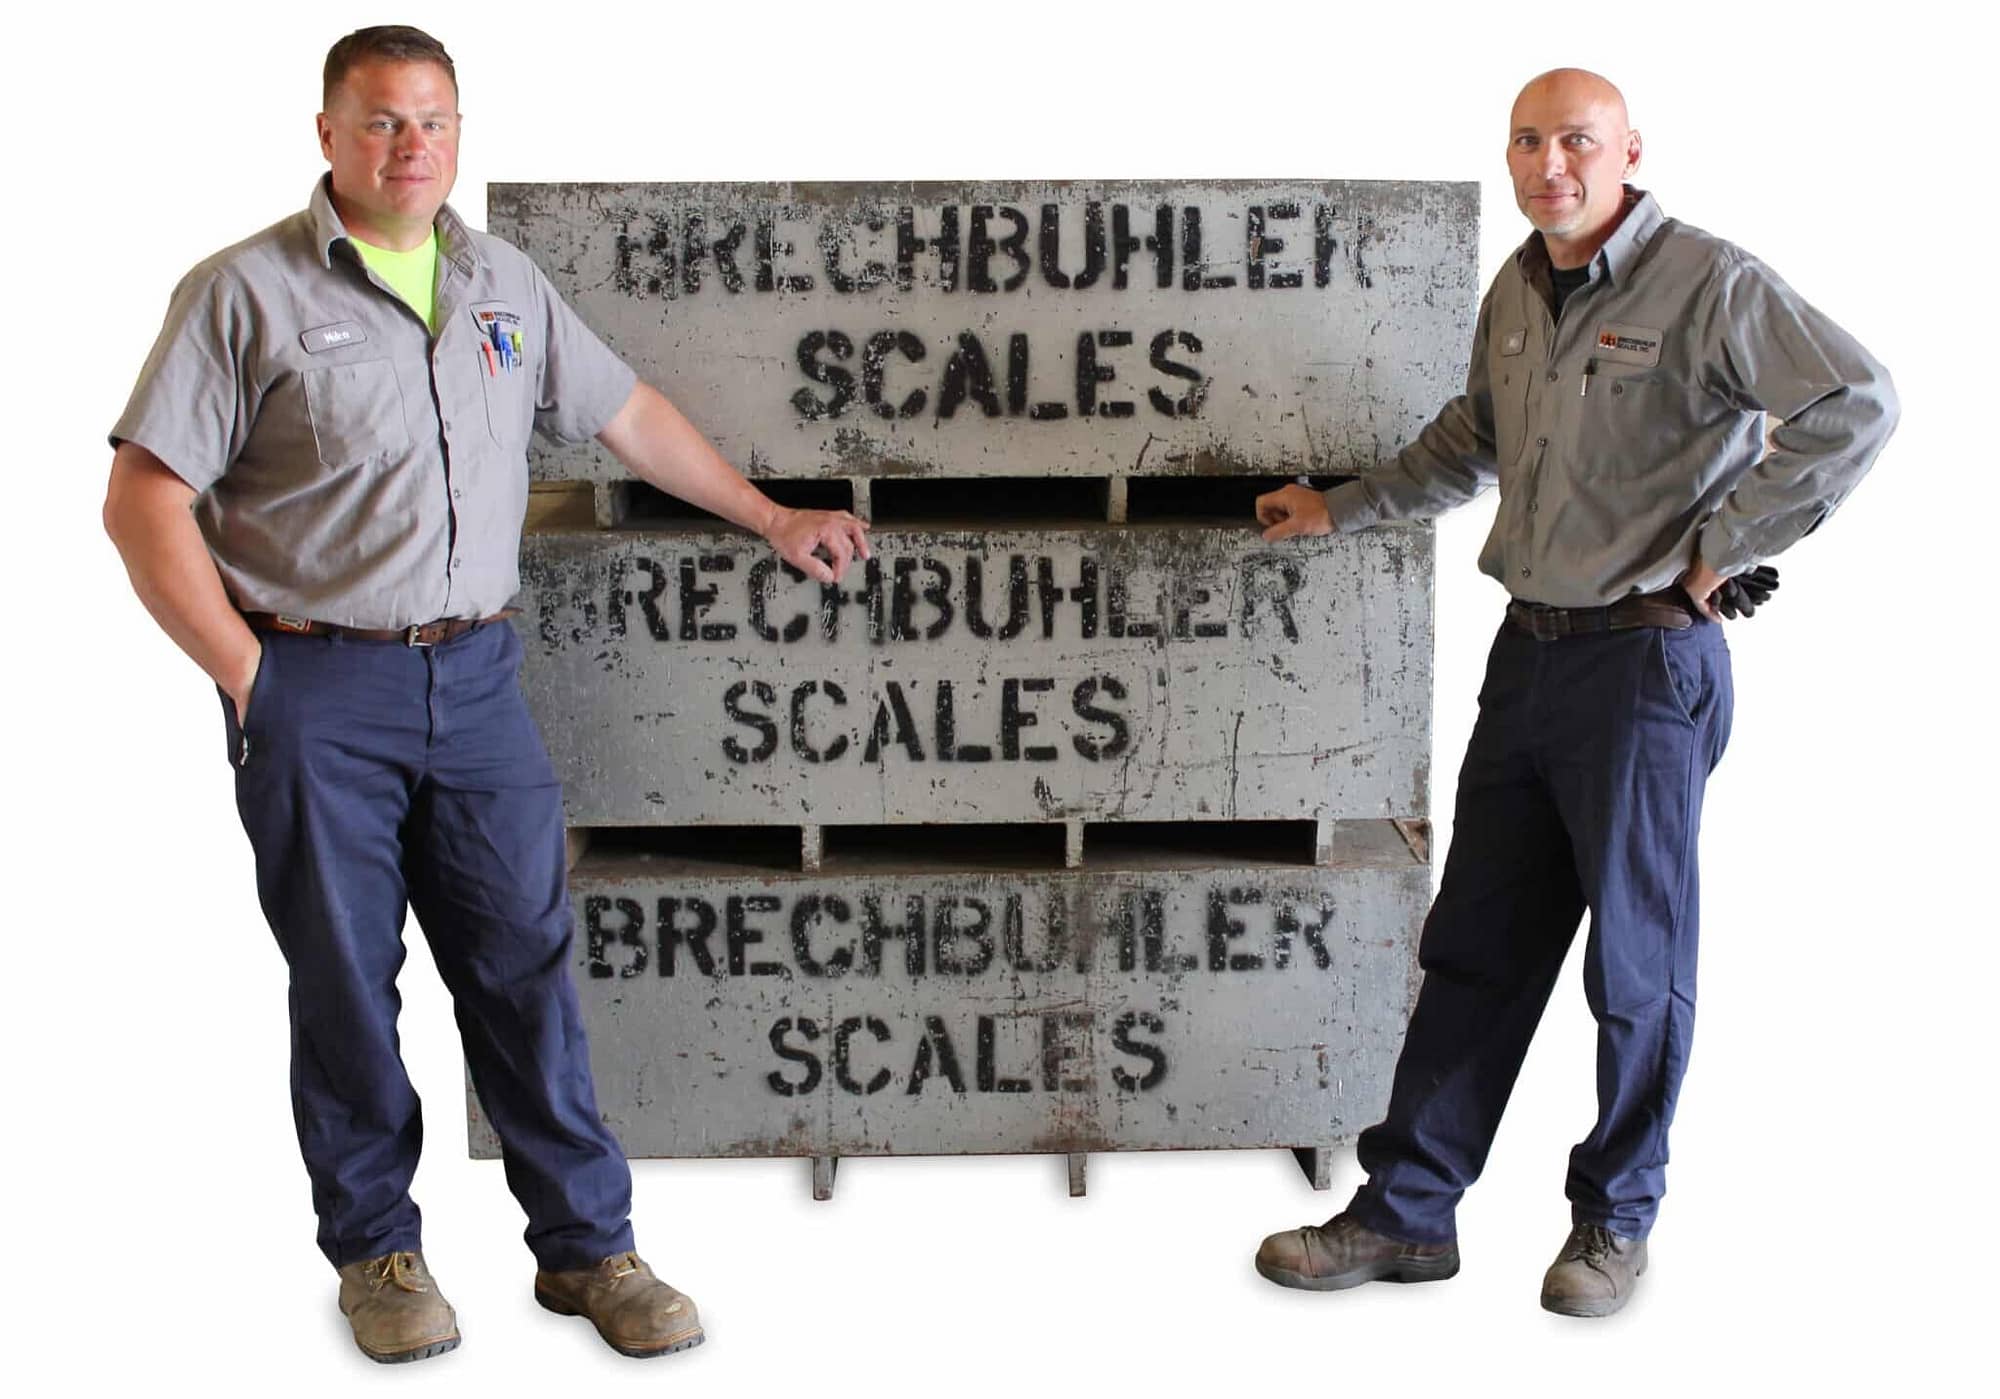 Mike and Mike Brechbuhler Scales